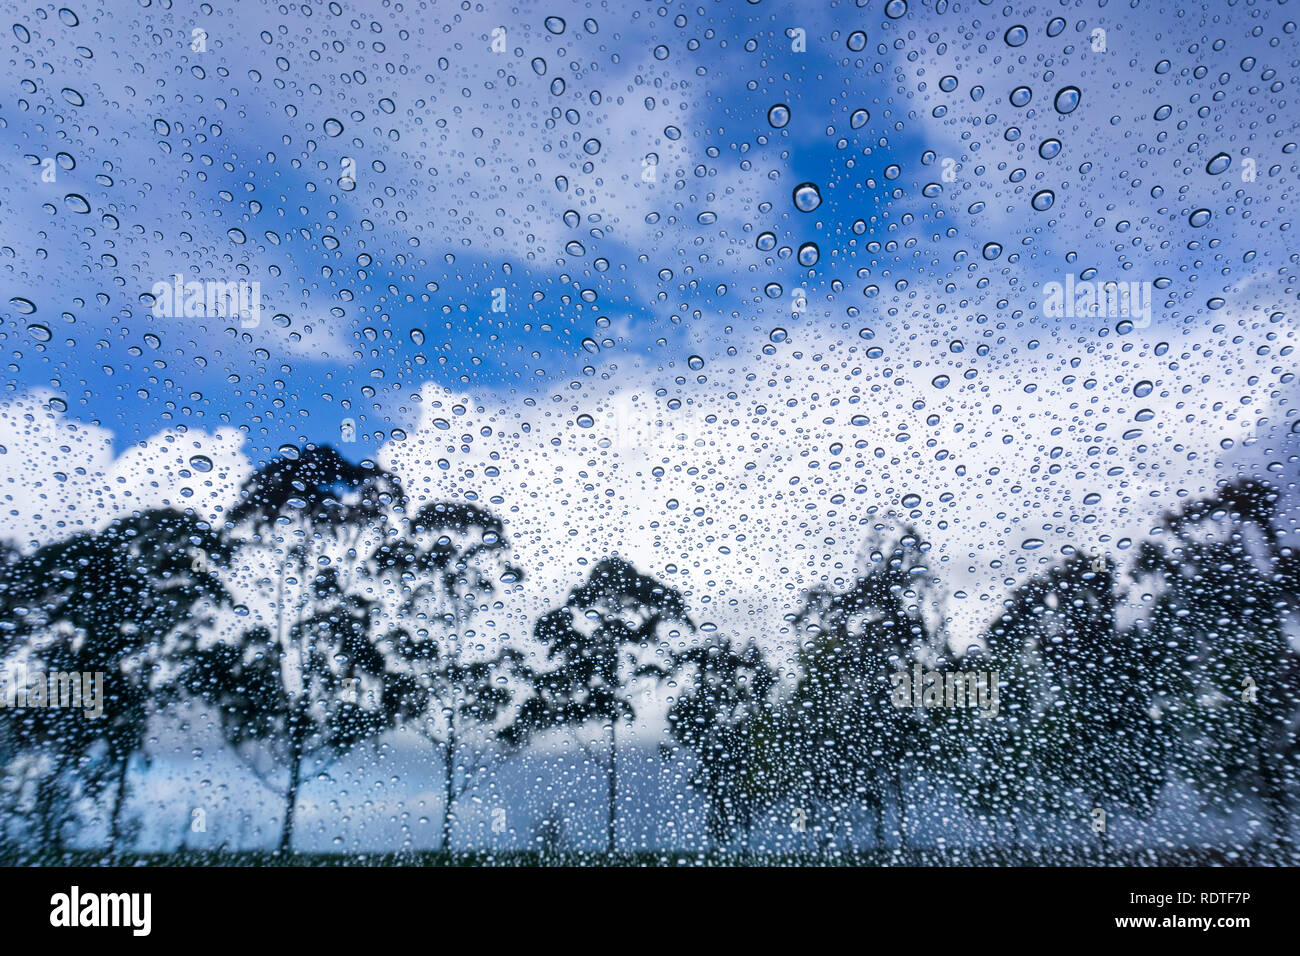 The clouds are breaking and the sun is coming out after a storm; Drops of rain on the window; blurred trees in the background; Stock Photo